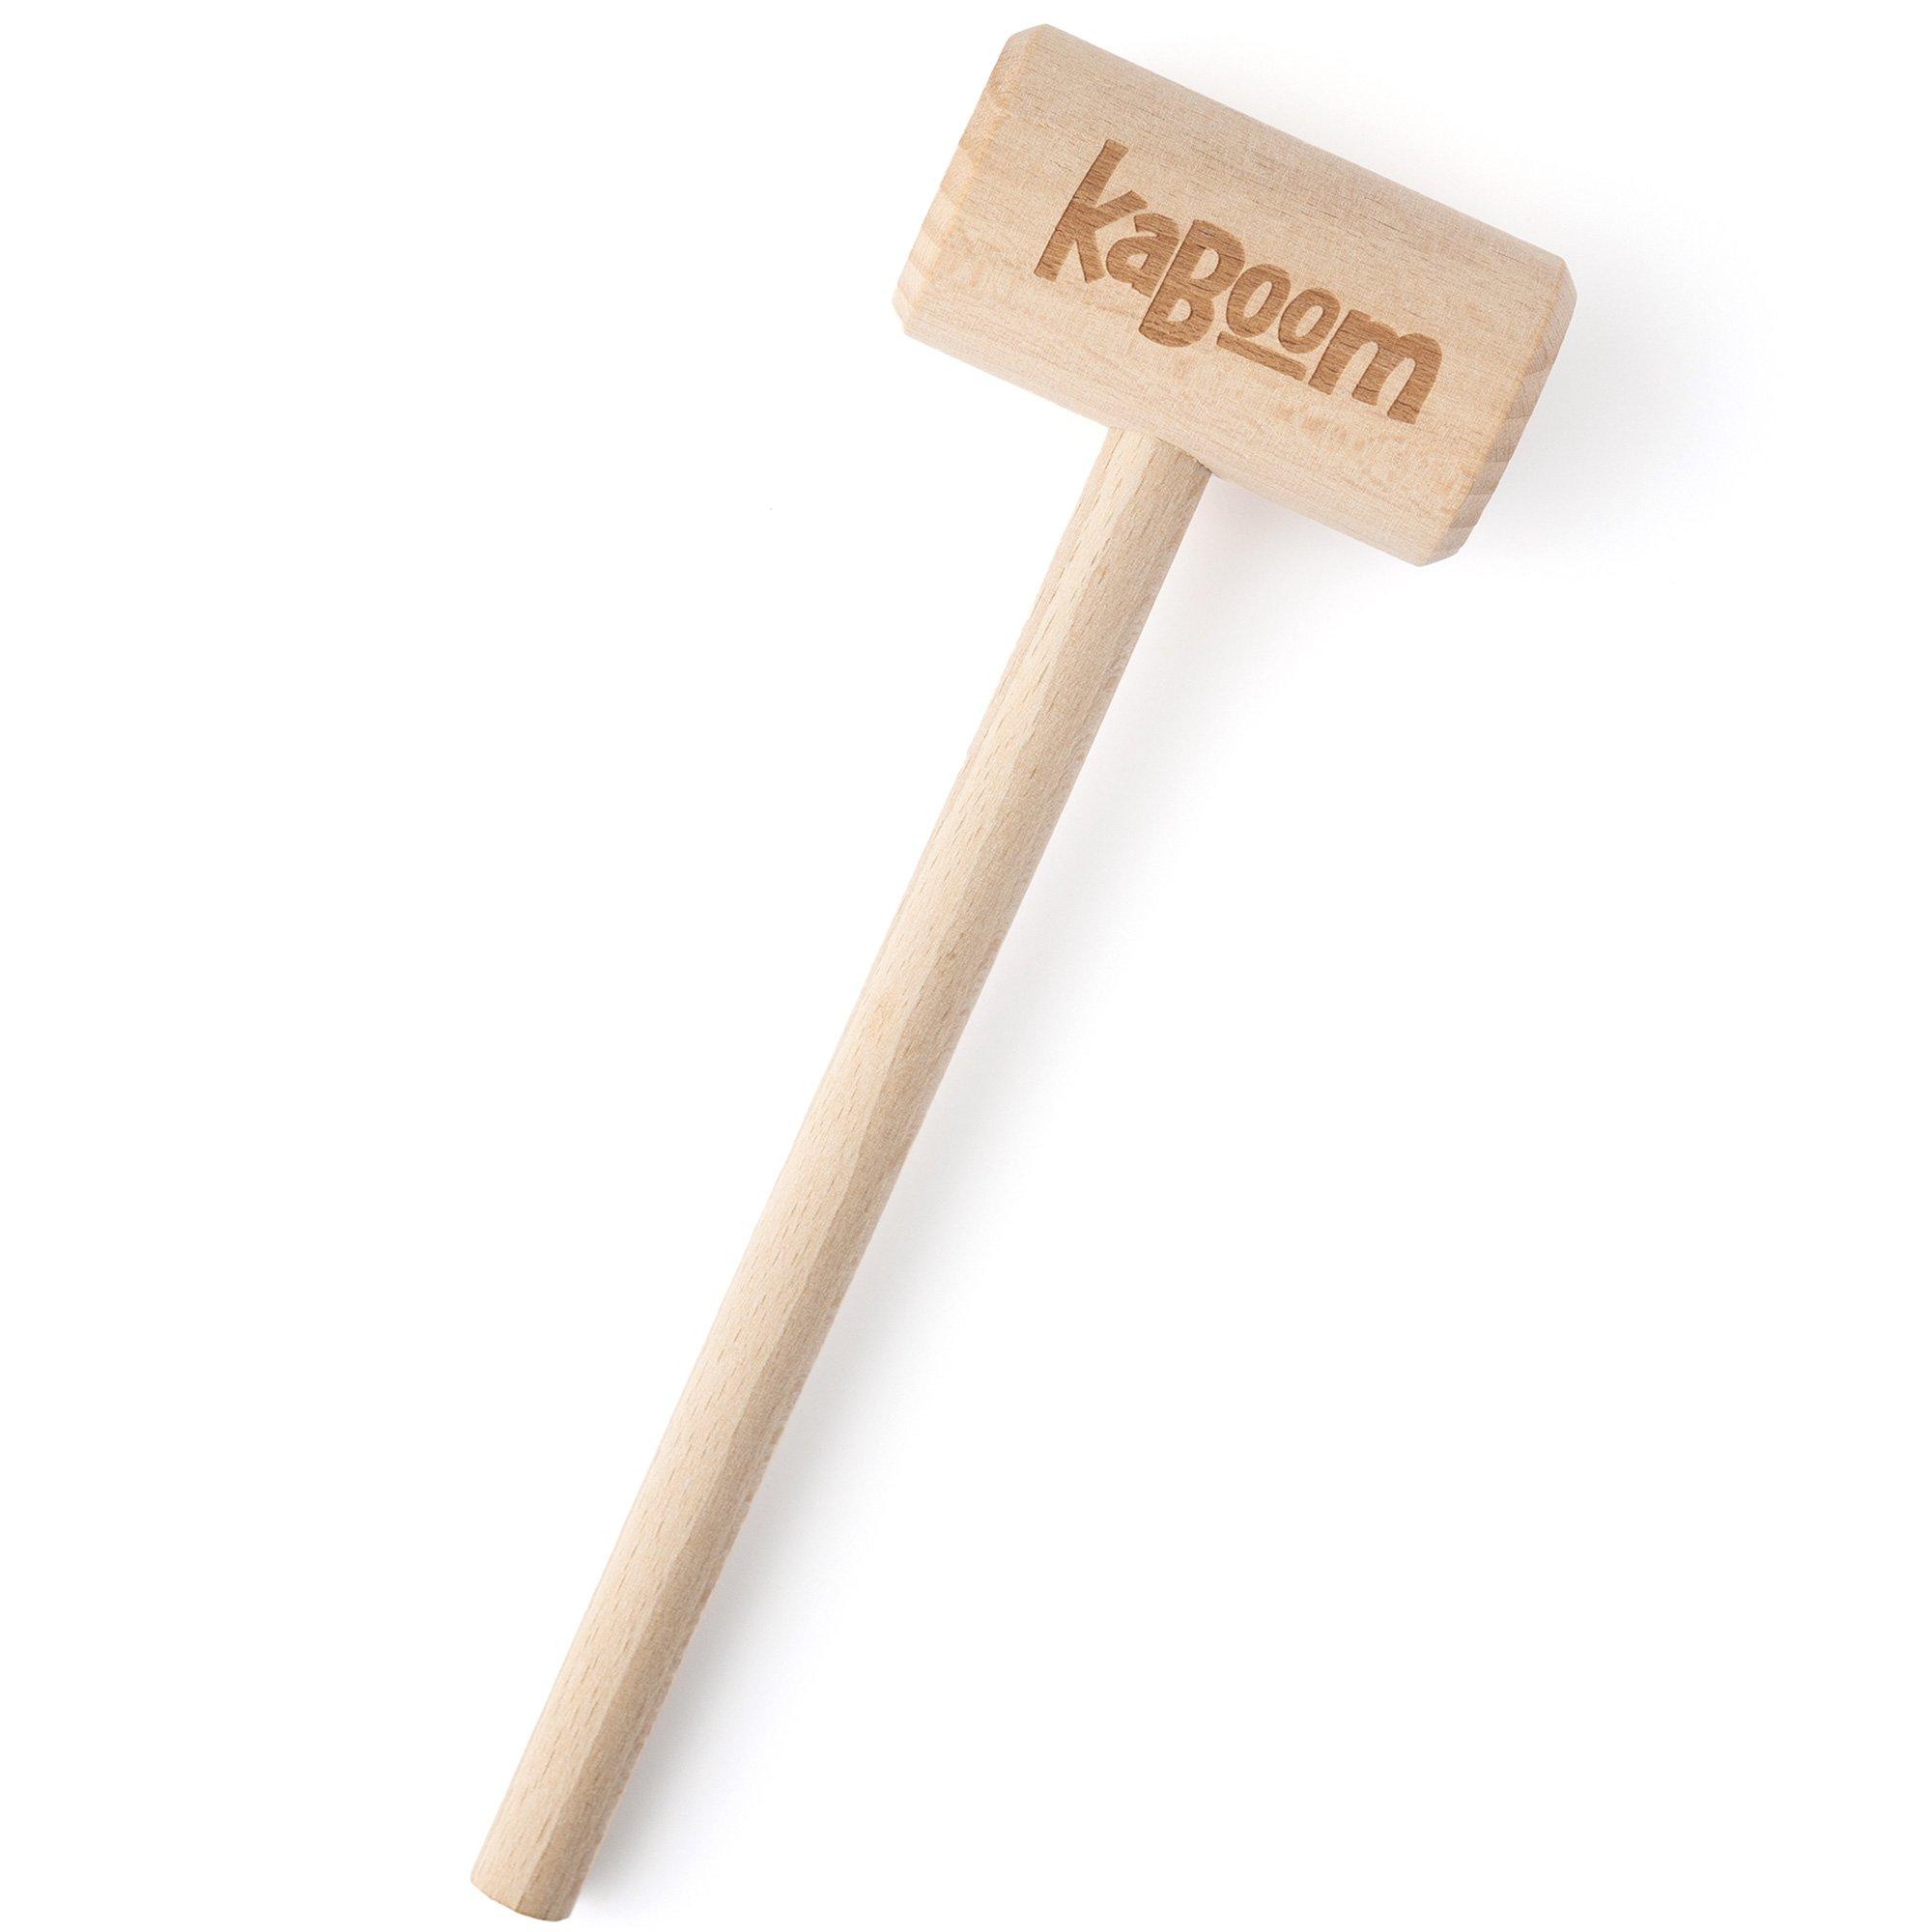 O'Creme Mini Wooden Mallet, Chocolate-Heart-Breaking Hammer to Open Chocolate Bombs or Hearts and Get The Treats Inside - 20 Pieces